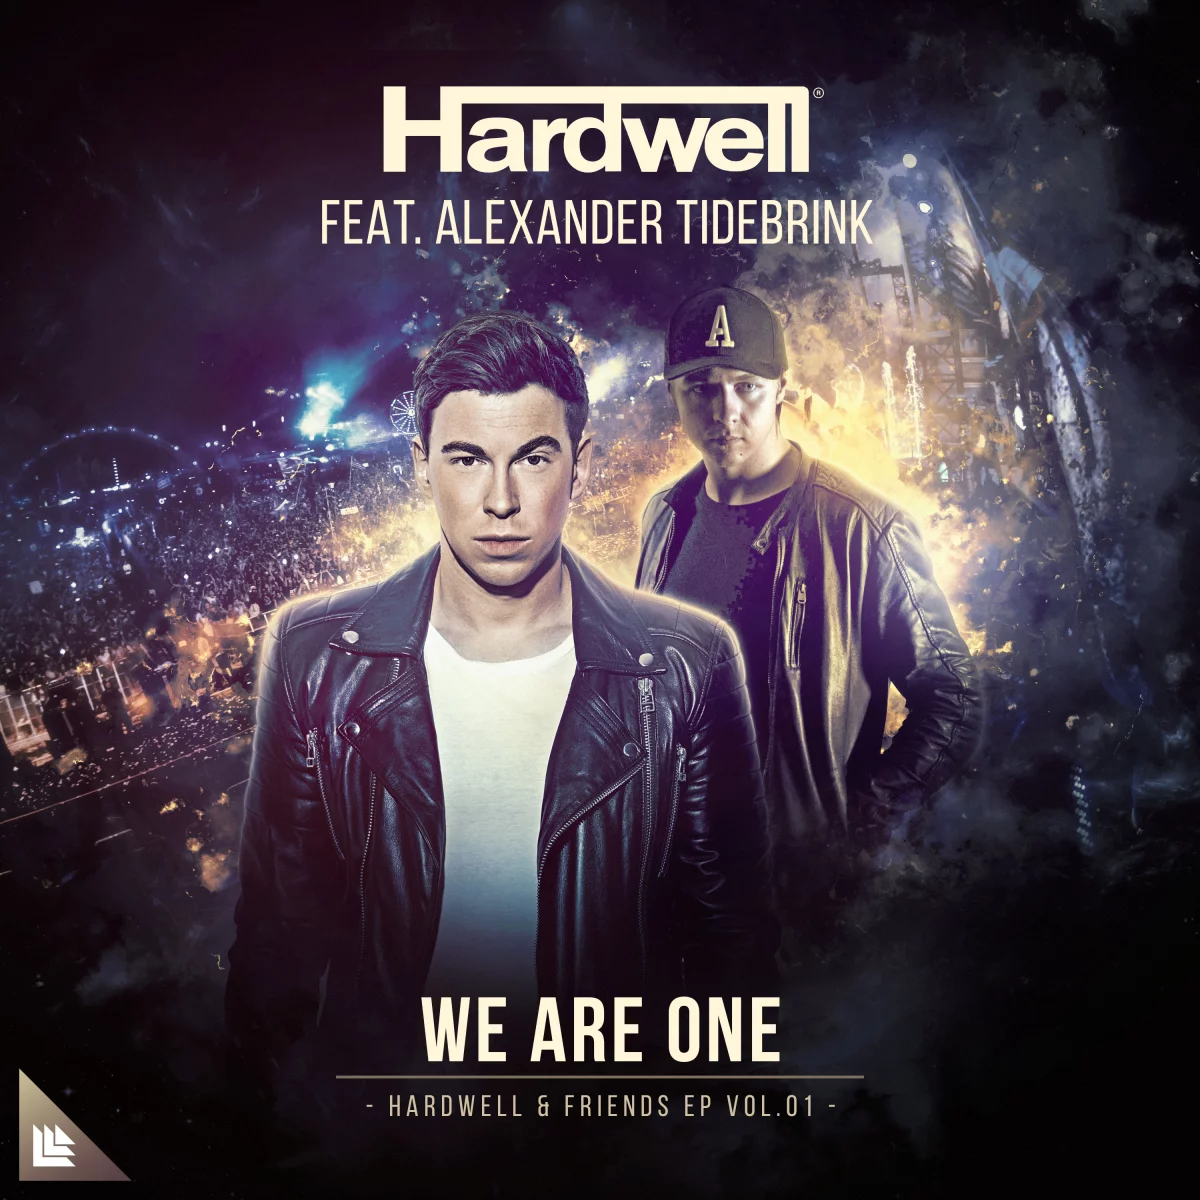 We Are One - Hardwell feat. Alexander Tidebrink